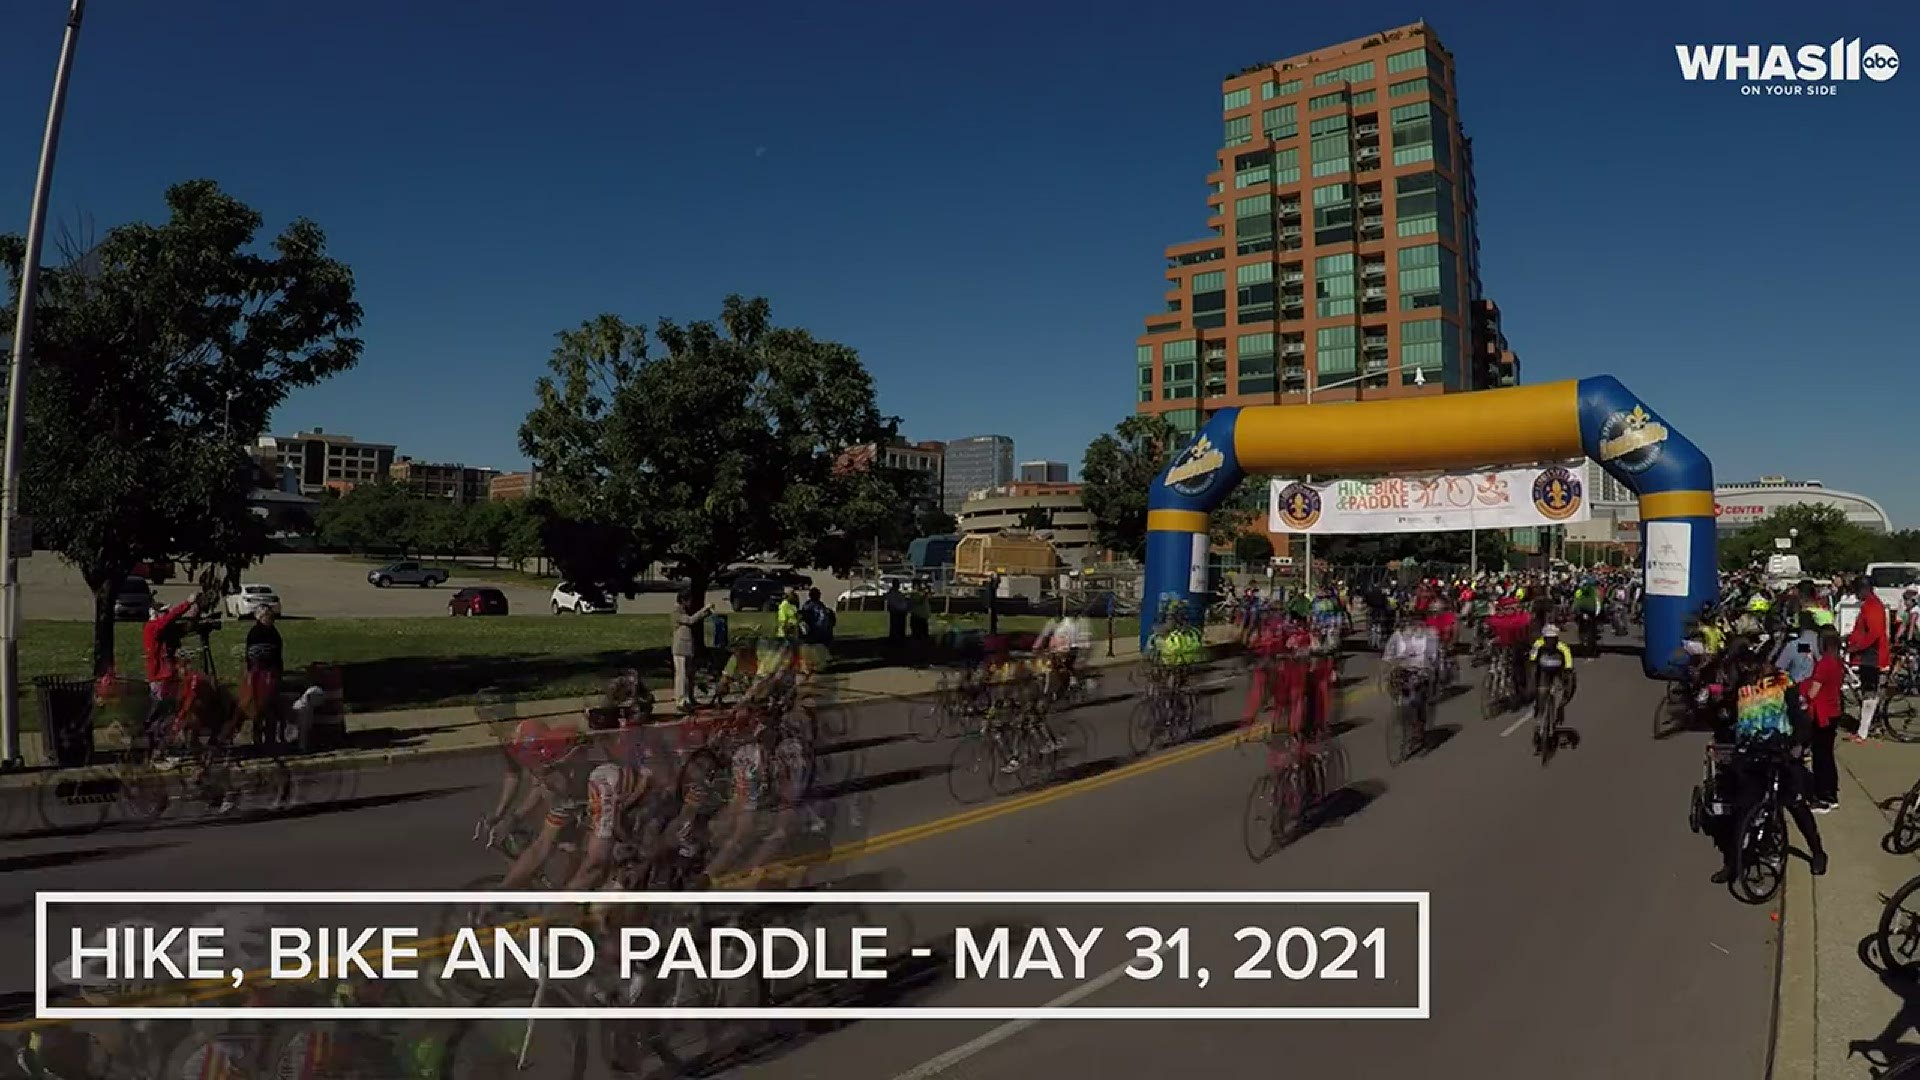 Check out this time-lapse of the cyclists taken by WHAS11 photographer Jake Cannon at the start of the 2021 Hike, Bike and Paddle in downtown Louisville.